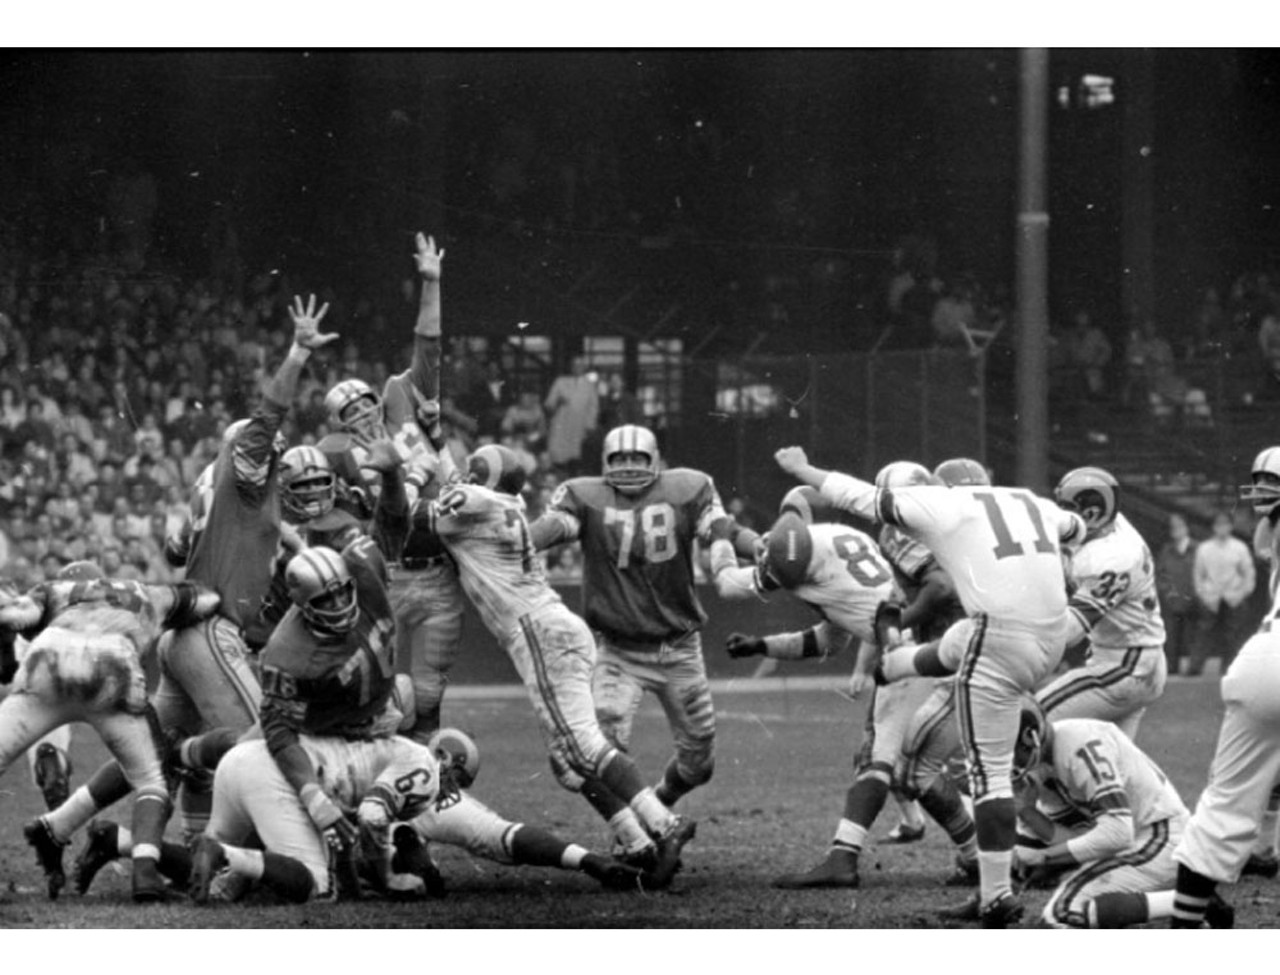 A 1961 game against Cleveland.